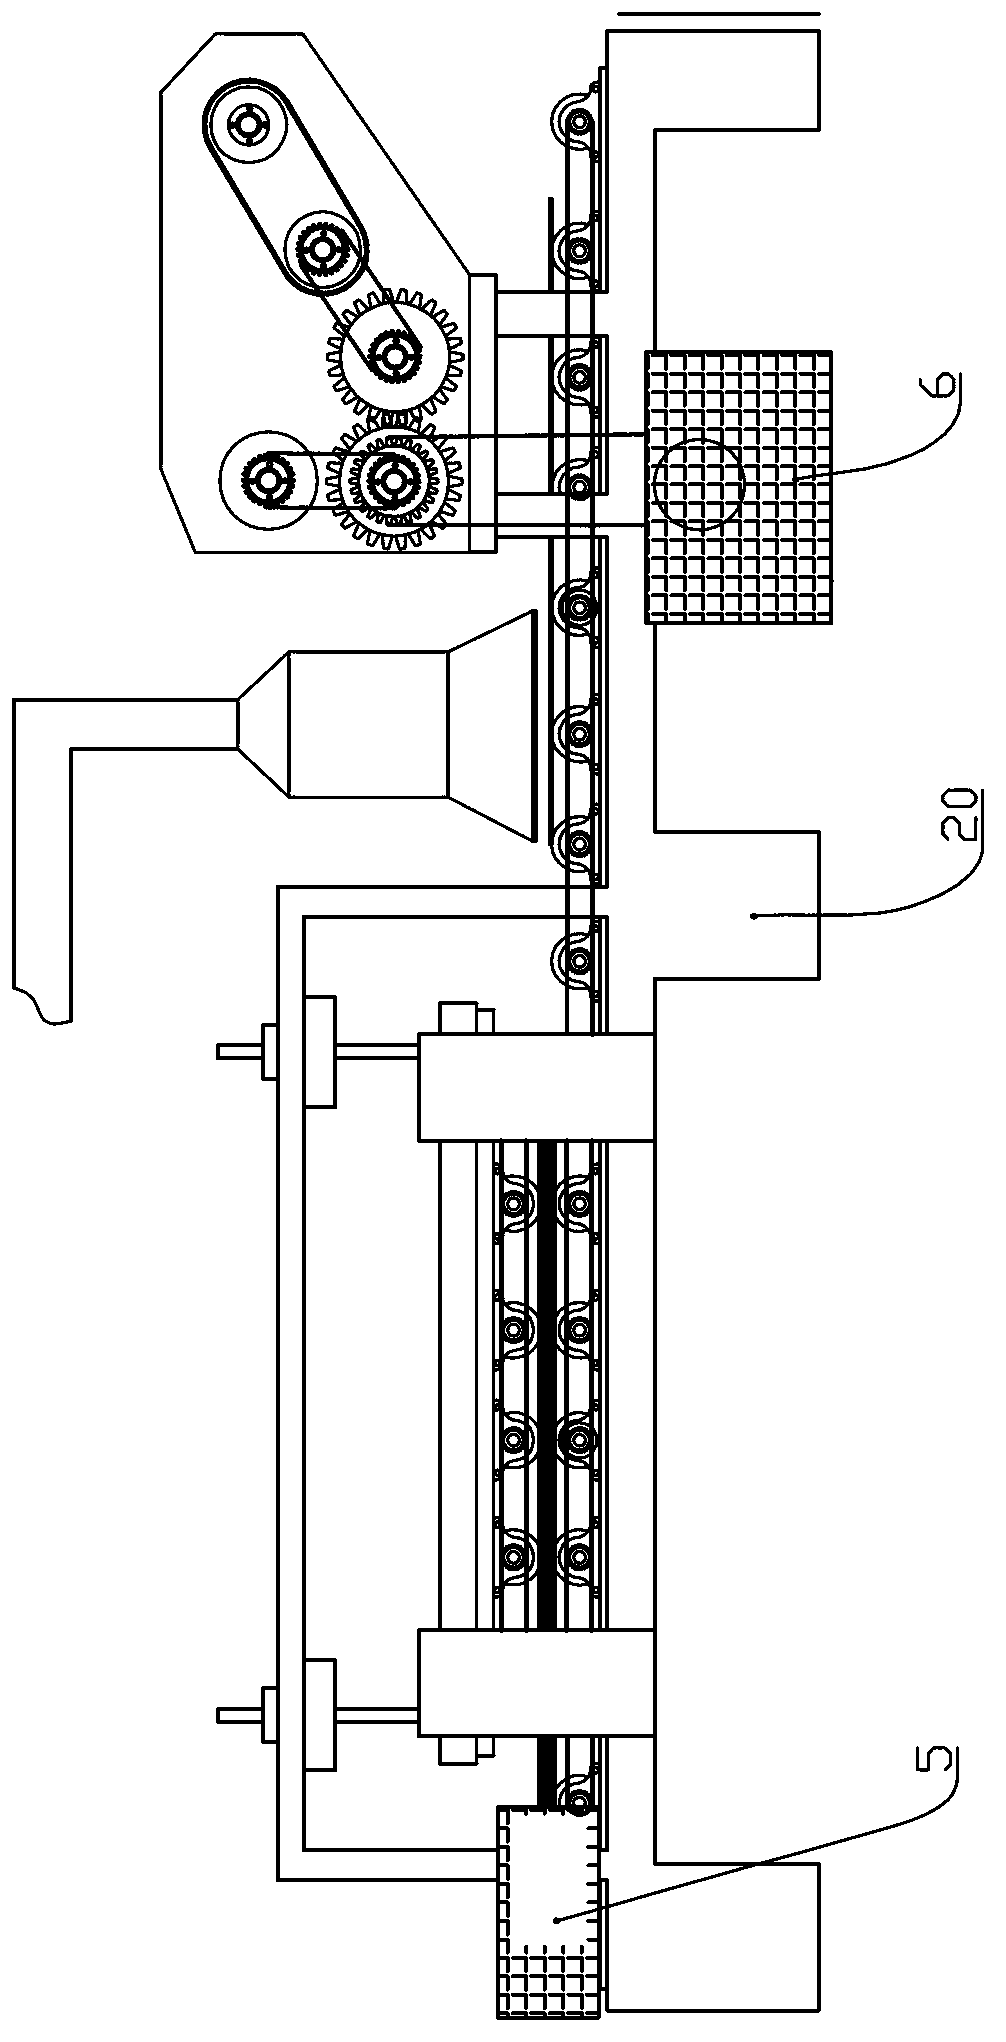 Material spreading system of embossed plate processing equipment